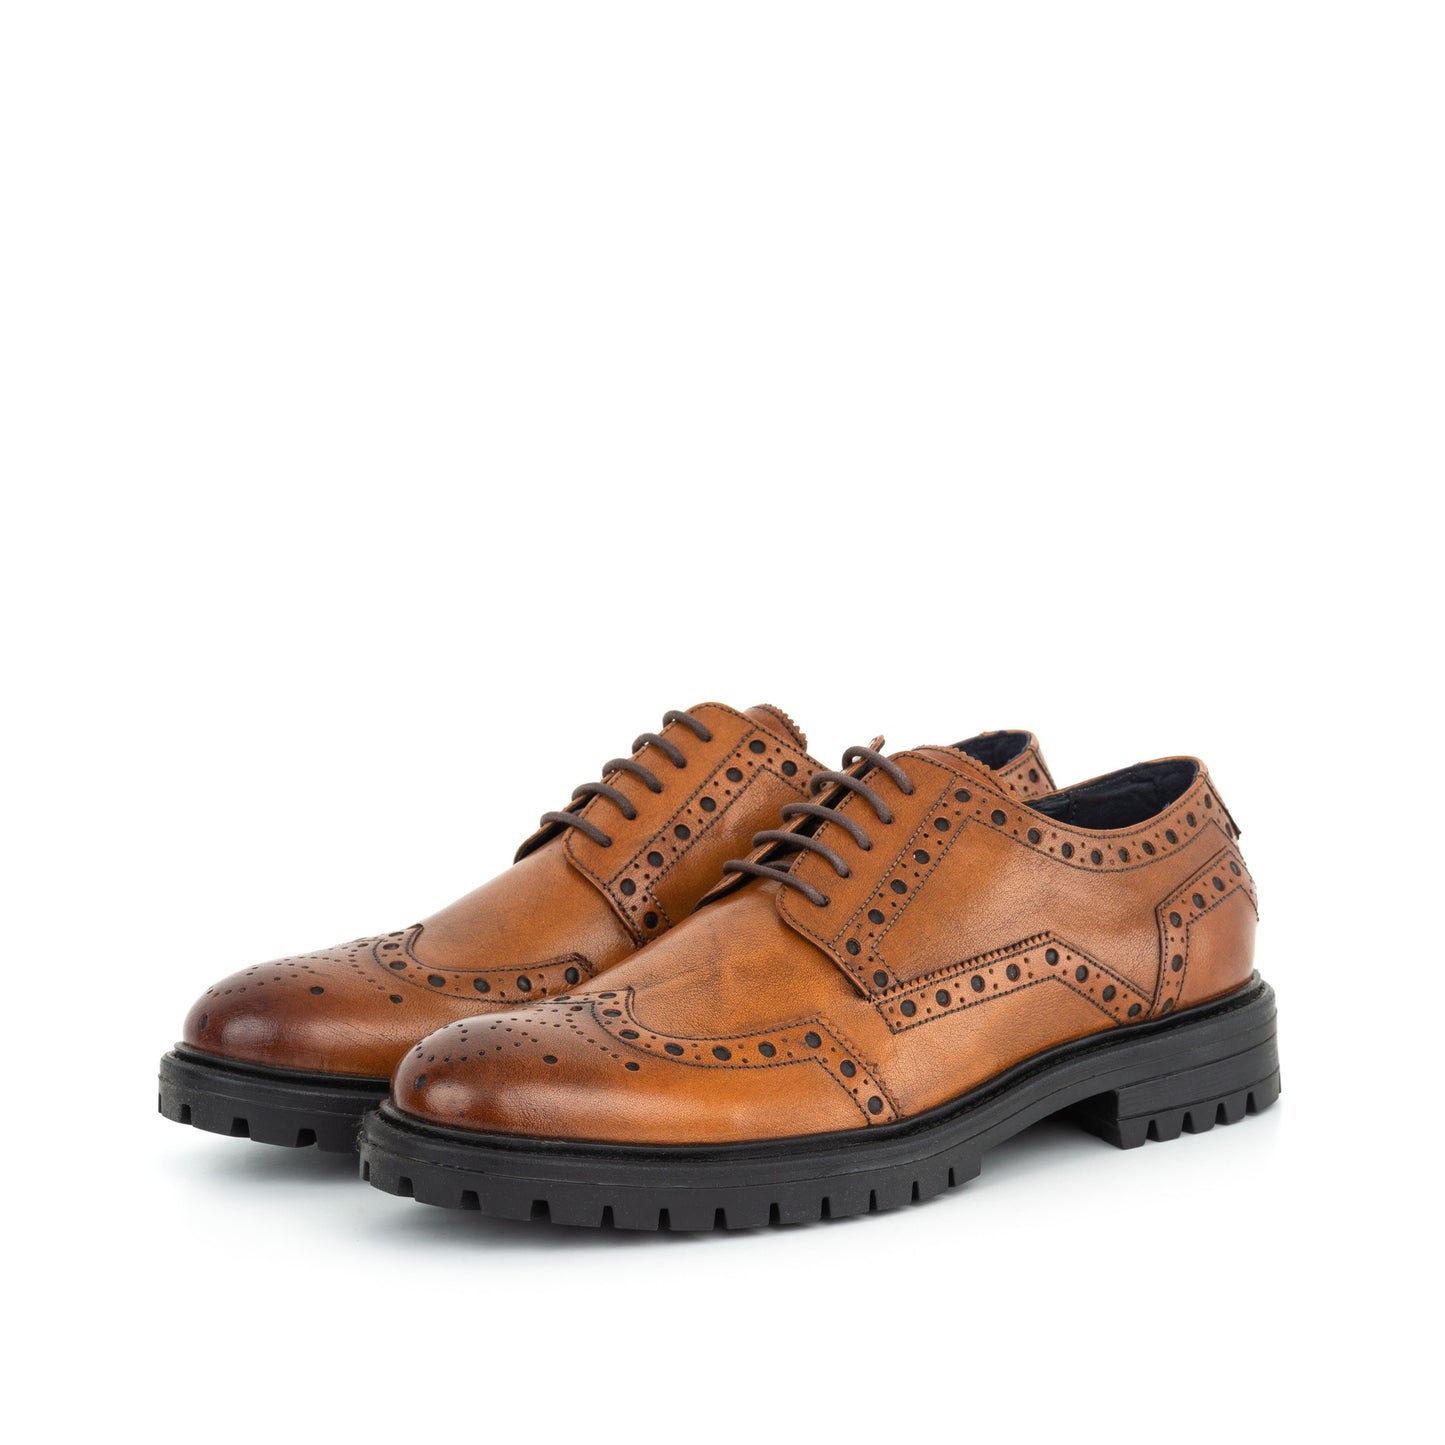 RUSSELL TAN DERBY BROGUE